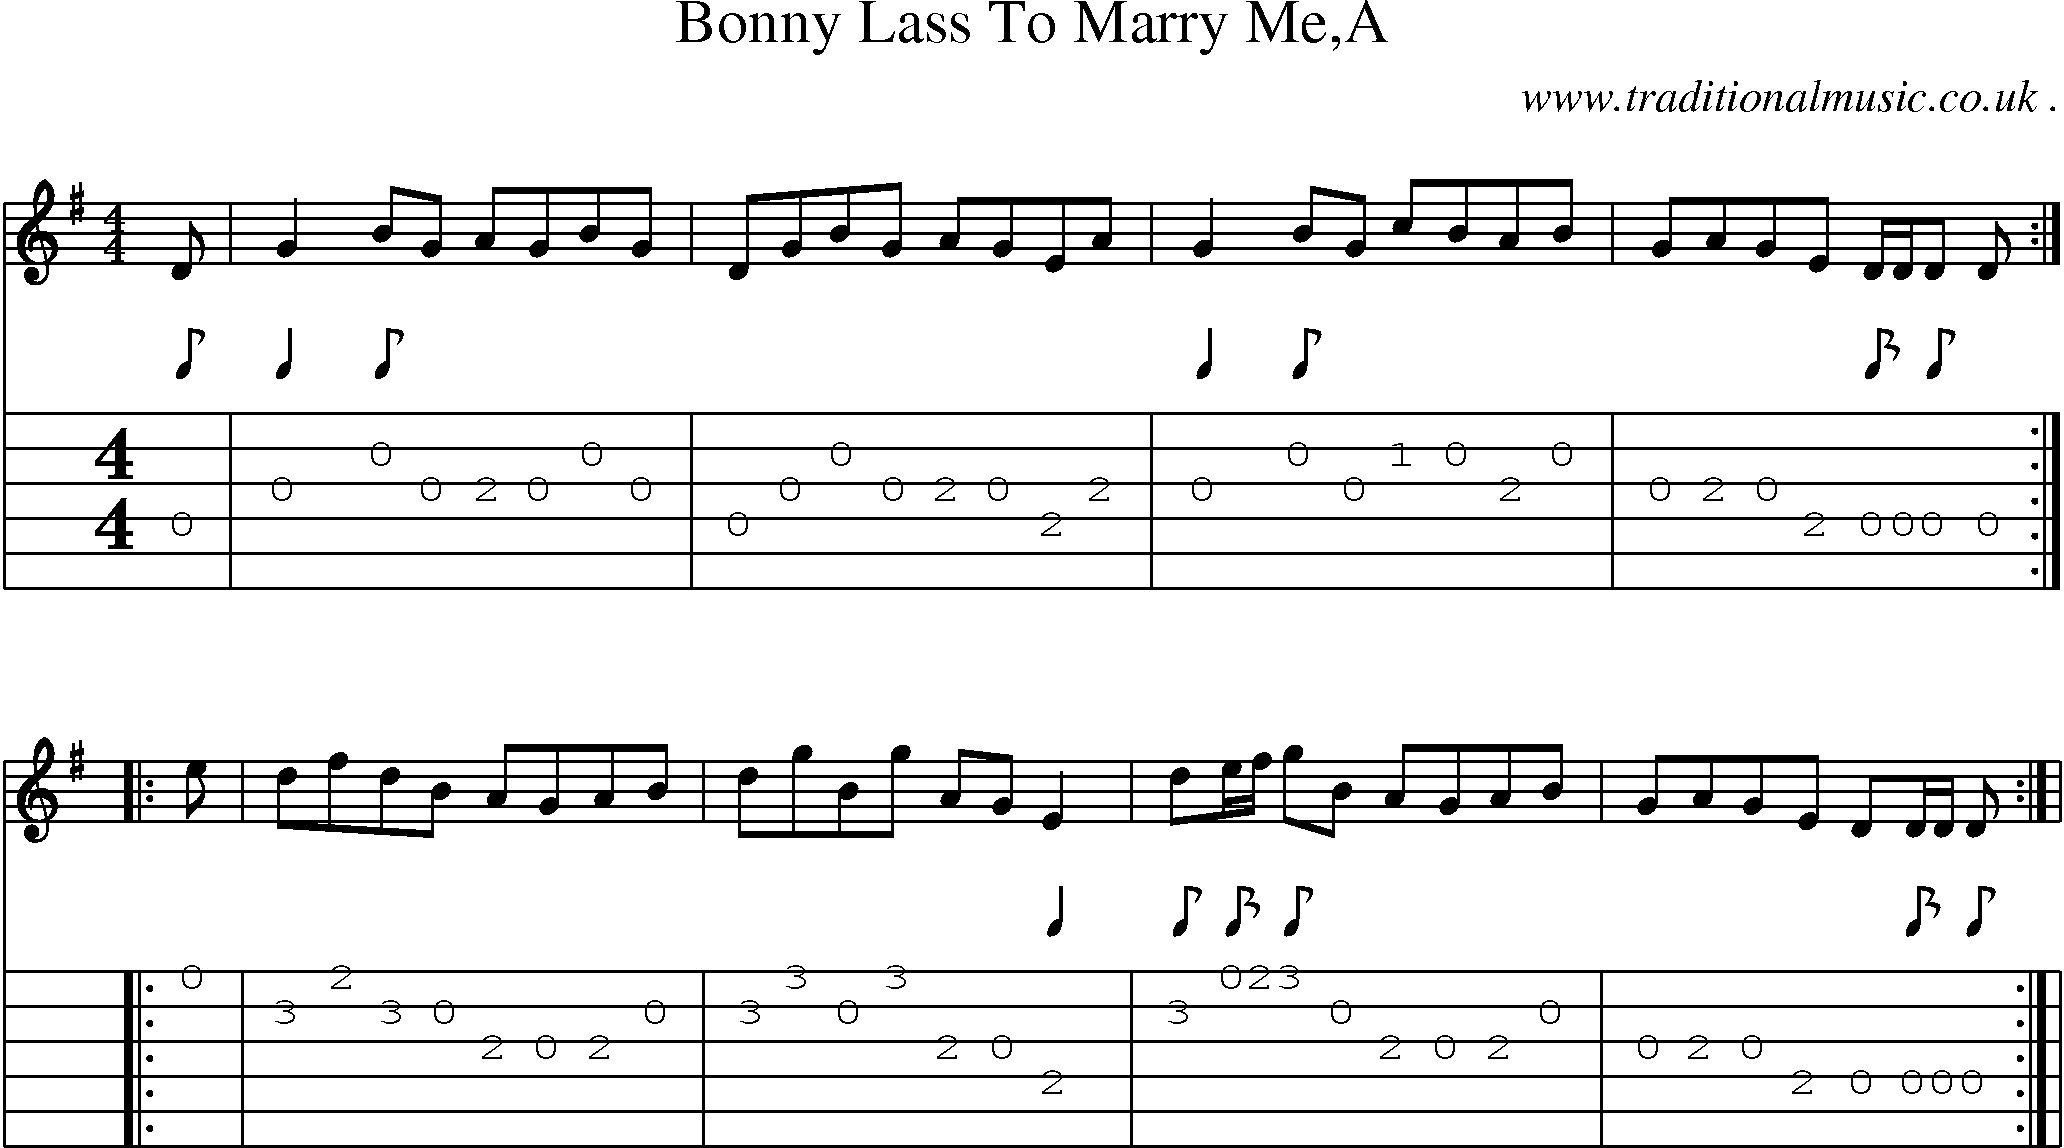 Sheet-Music and Guitar Tabs for Bonny Lass To Marry Mea